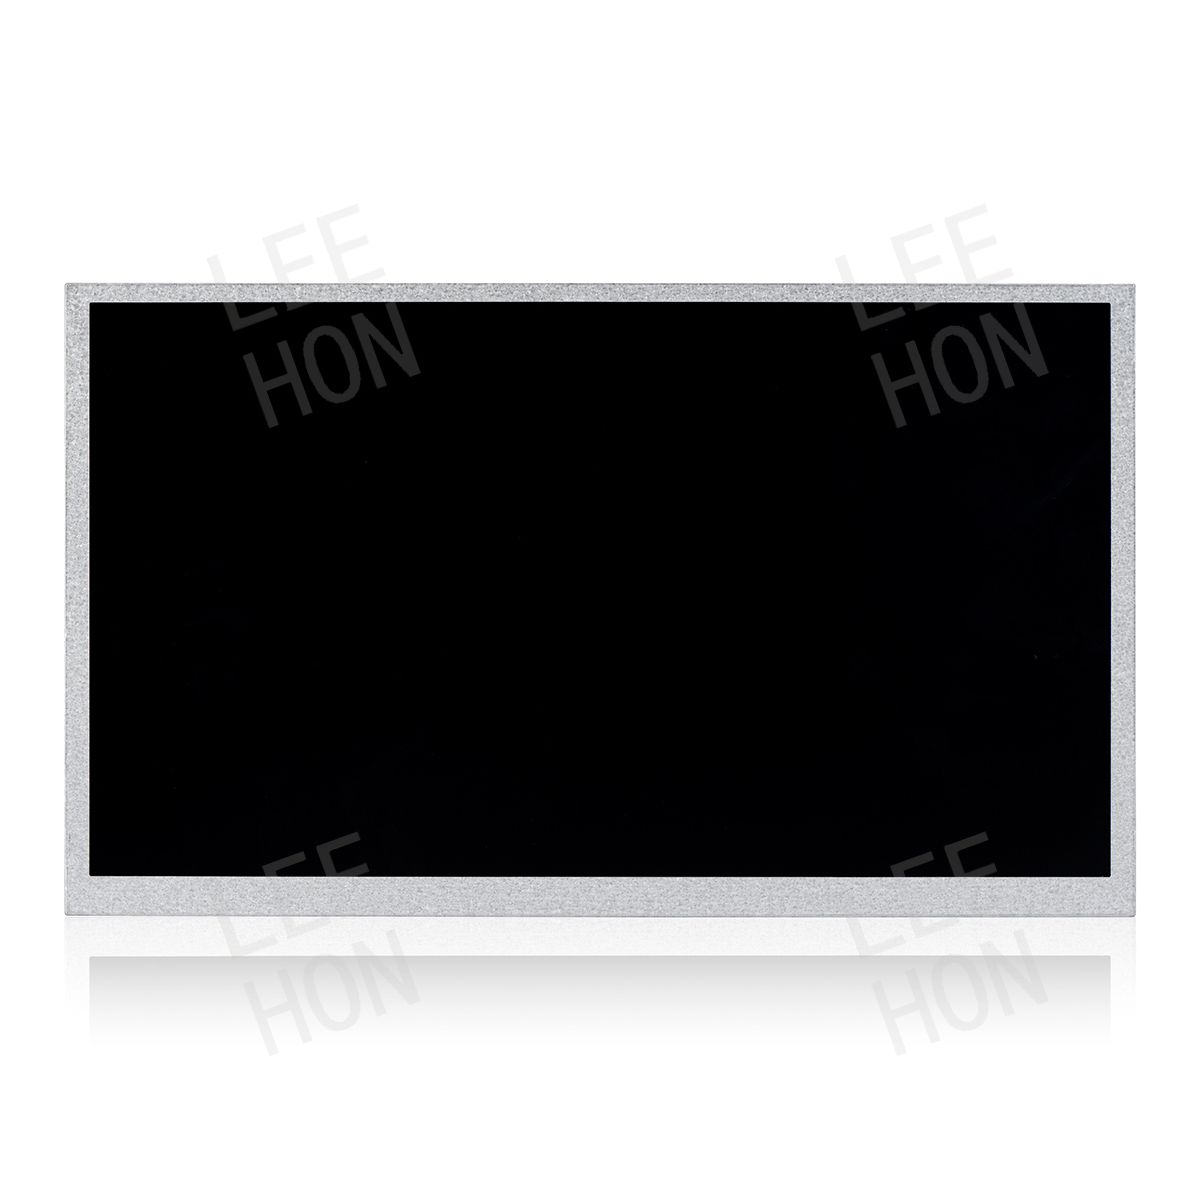 AUO 13.3 Inch 1920x1080 HD LCD Panel TFT IPS Display G133HAN01.1 400nits and 30 pins LVDS